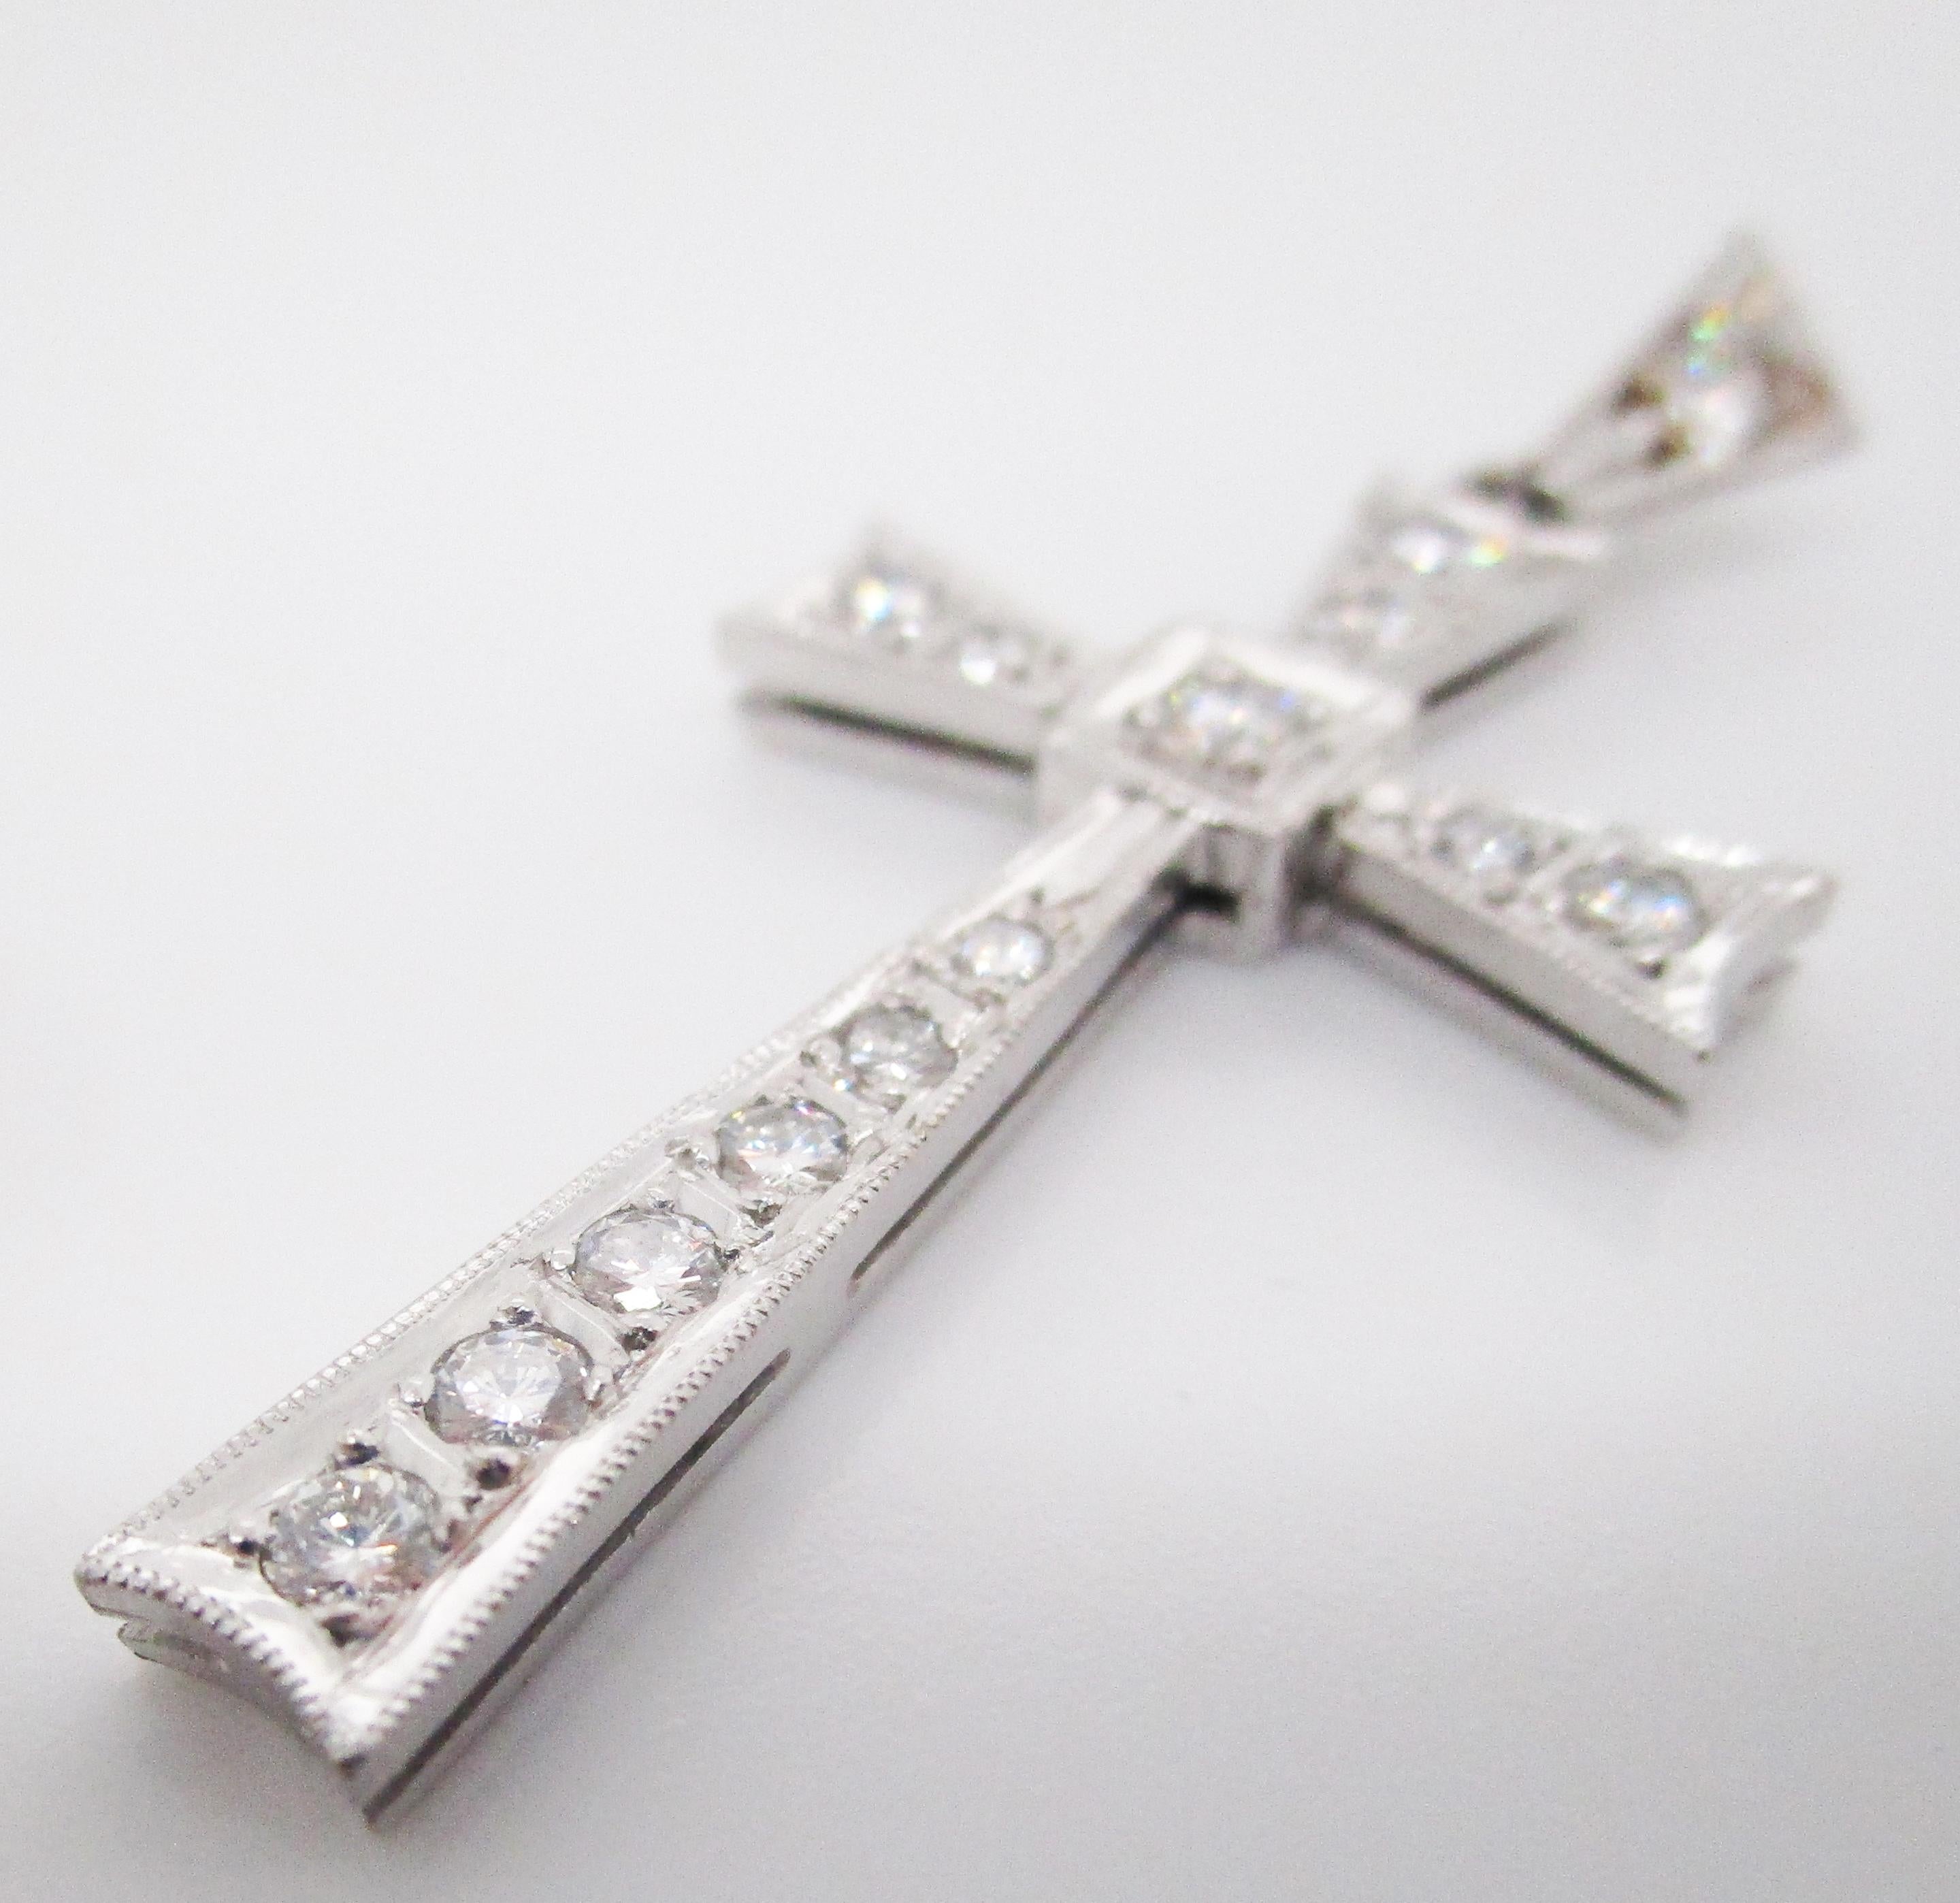 This enchantingly elegant pendant unites bright white platinum with a series of stunningly brilliant white diamonds in a clear mid-century design cross! Every arm of the cross is set with absolutely gorgeous bright white diamonds, completed